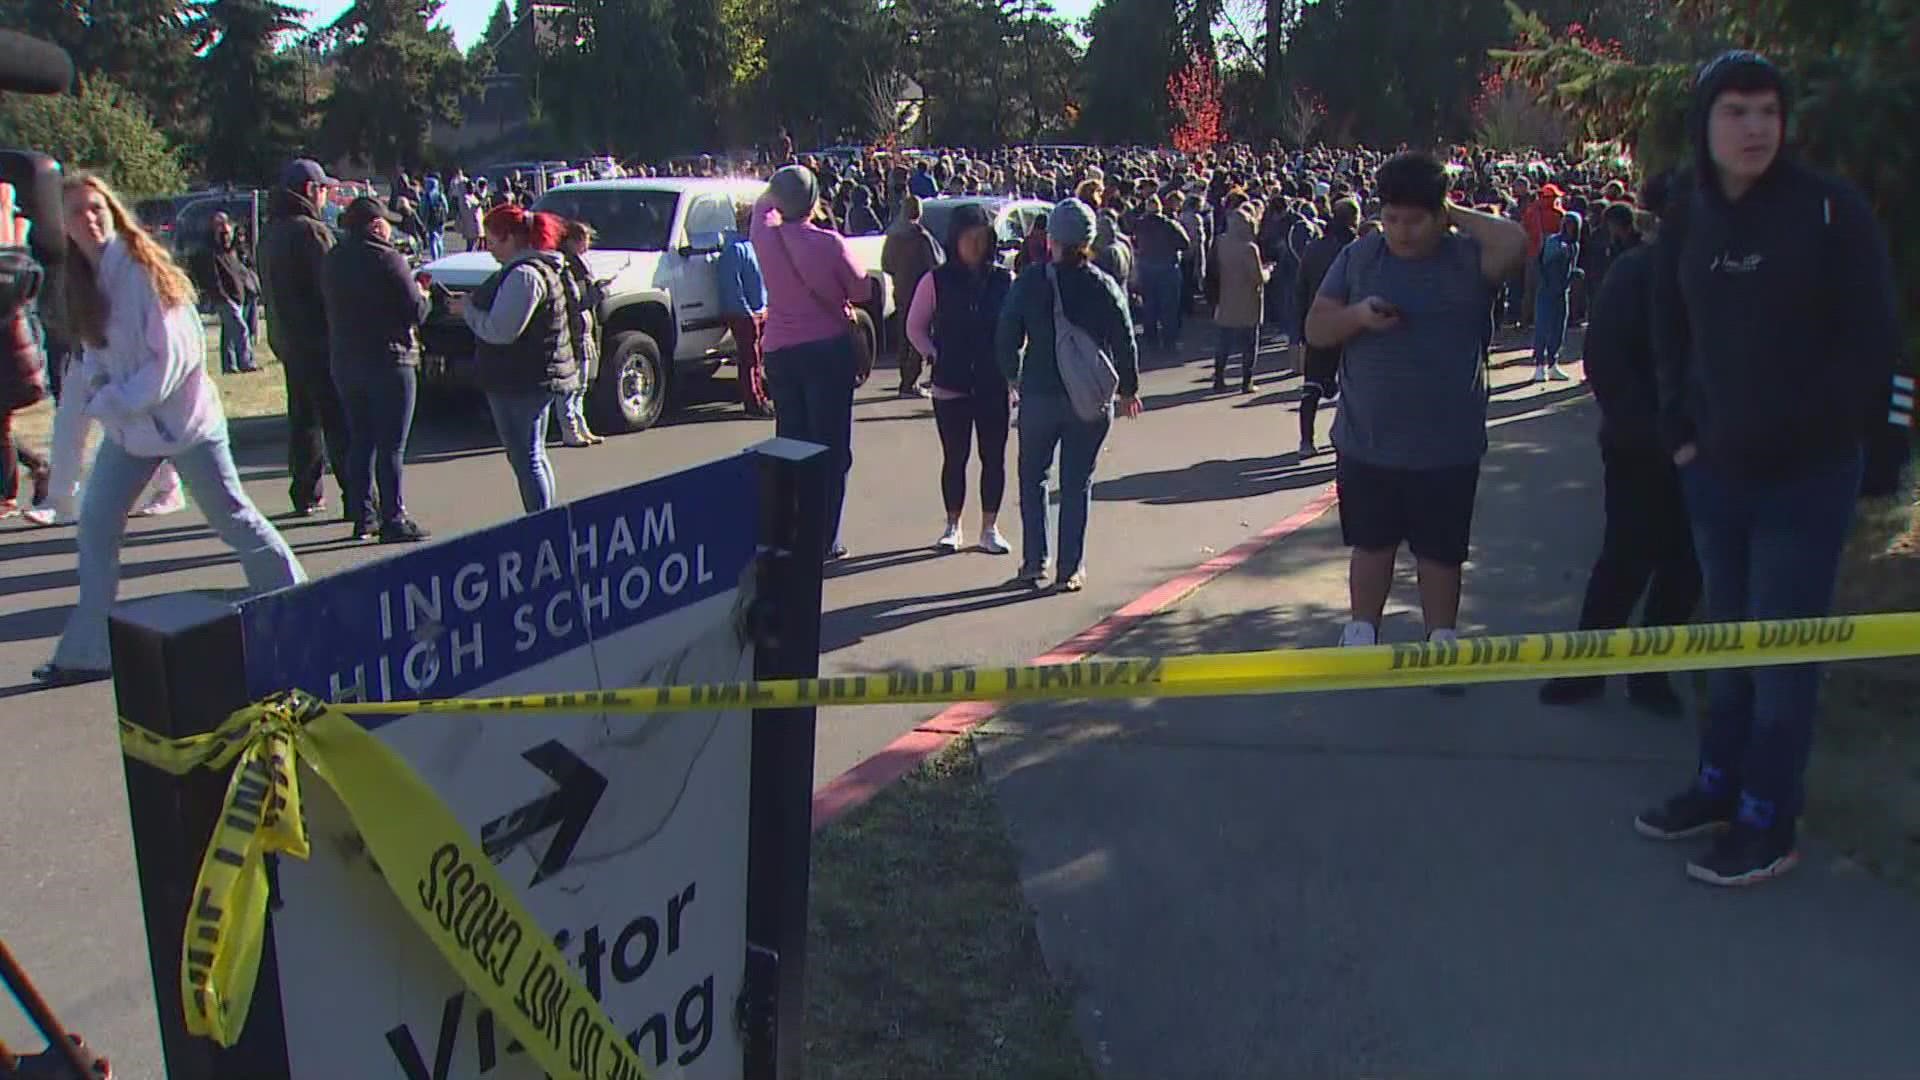 One student was shot and killed Tuesday morning at Ingraham High School in North Seattle.